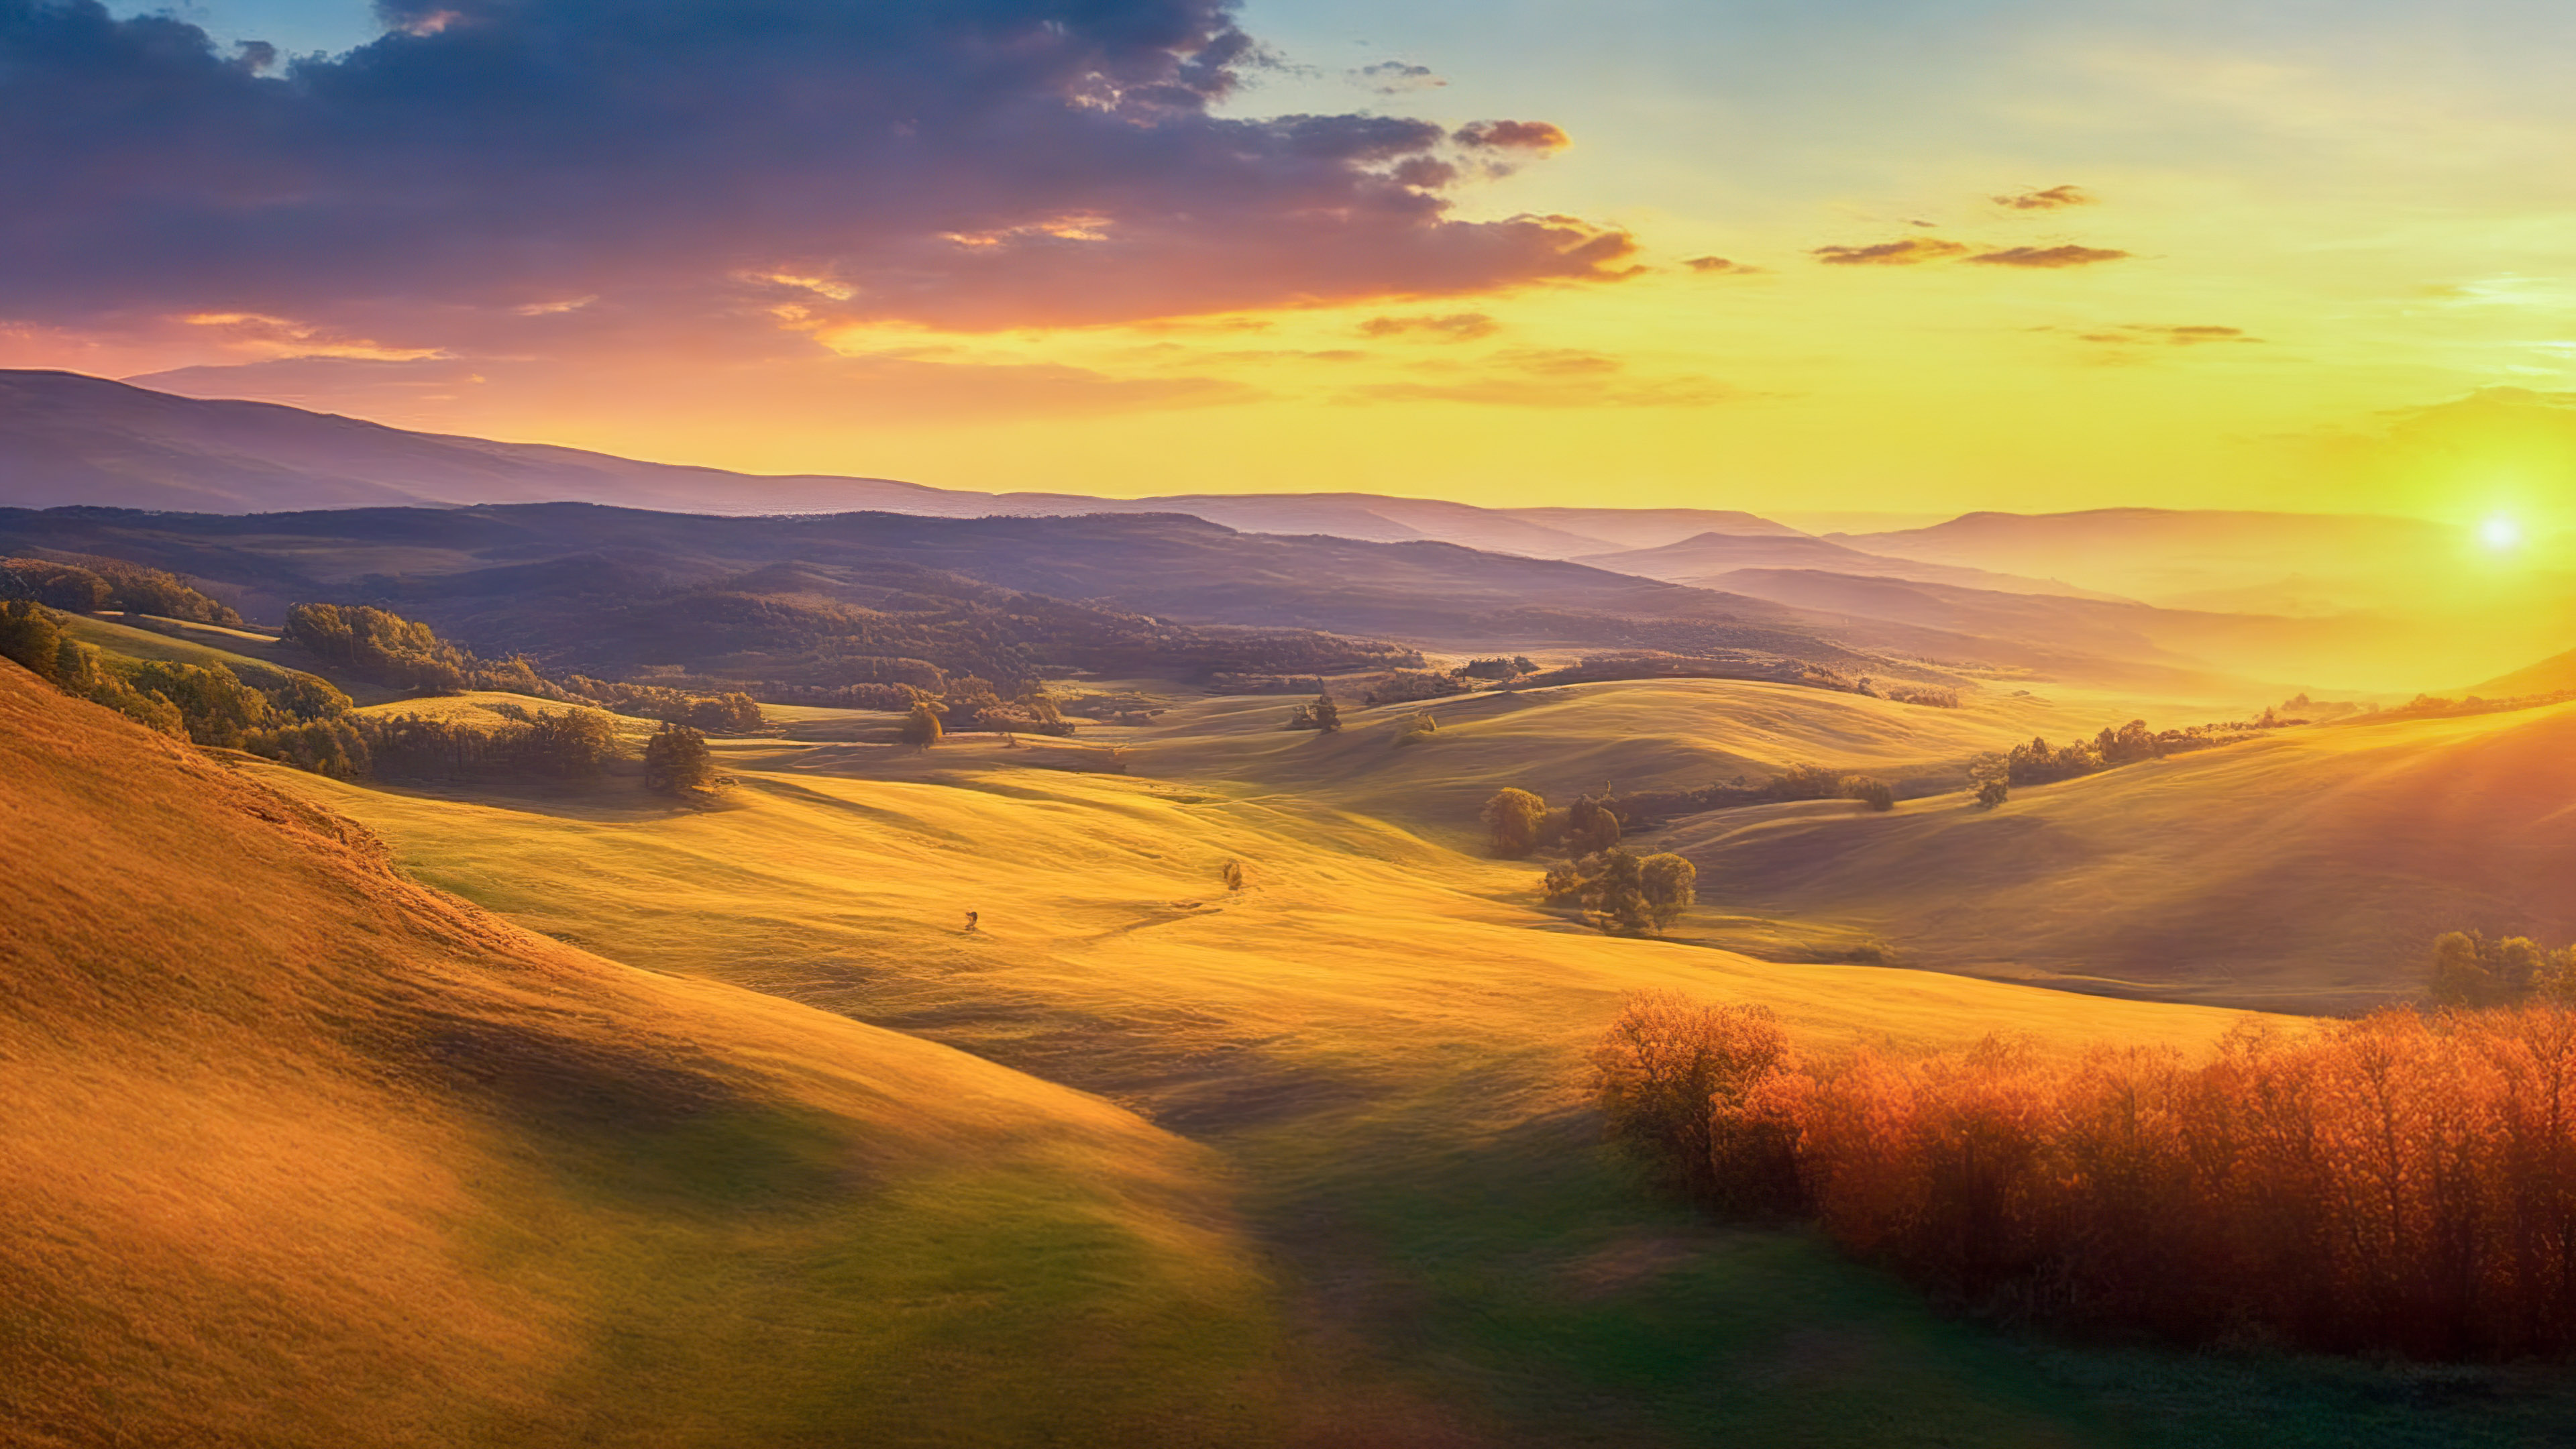 Bring the beauty of a breathtaking sunrise over a tranquil countryside, with rolling hills and a warm, golden glow, to your device with our HD nature wallpaper backgrounds, and let your screen transport you to a serene morning in the countryside.